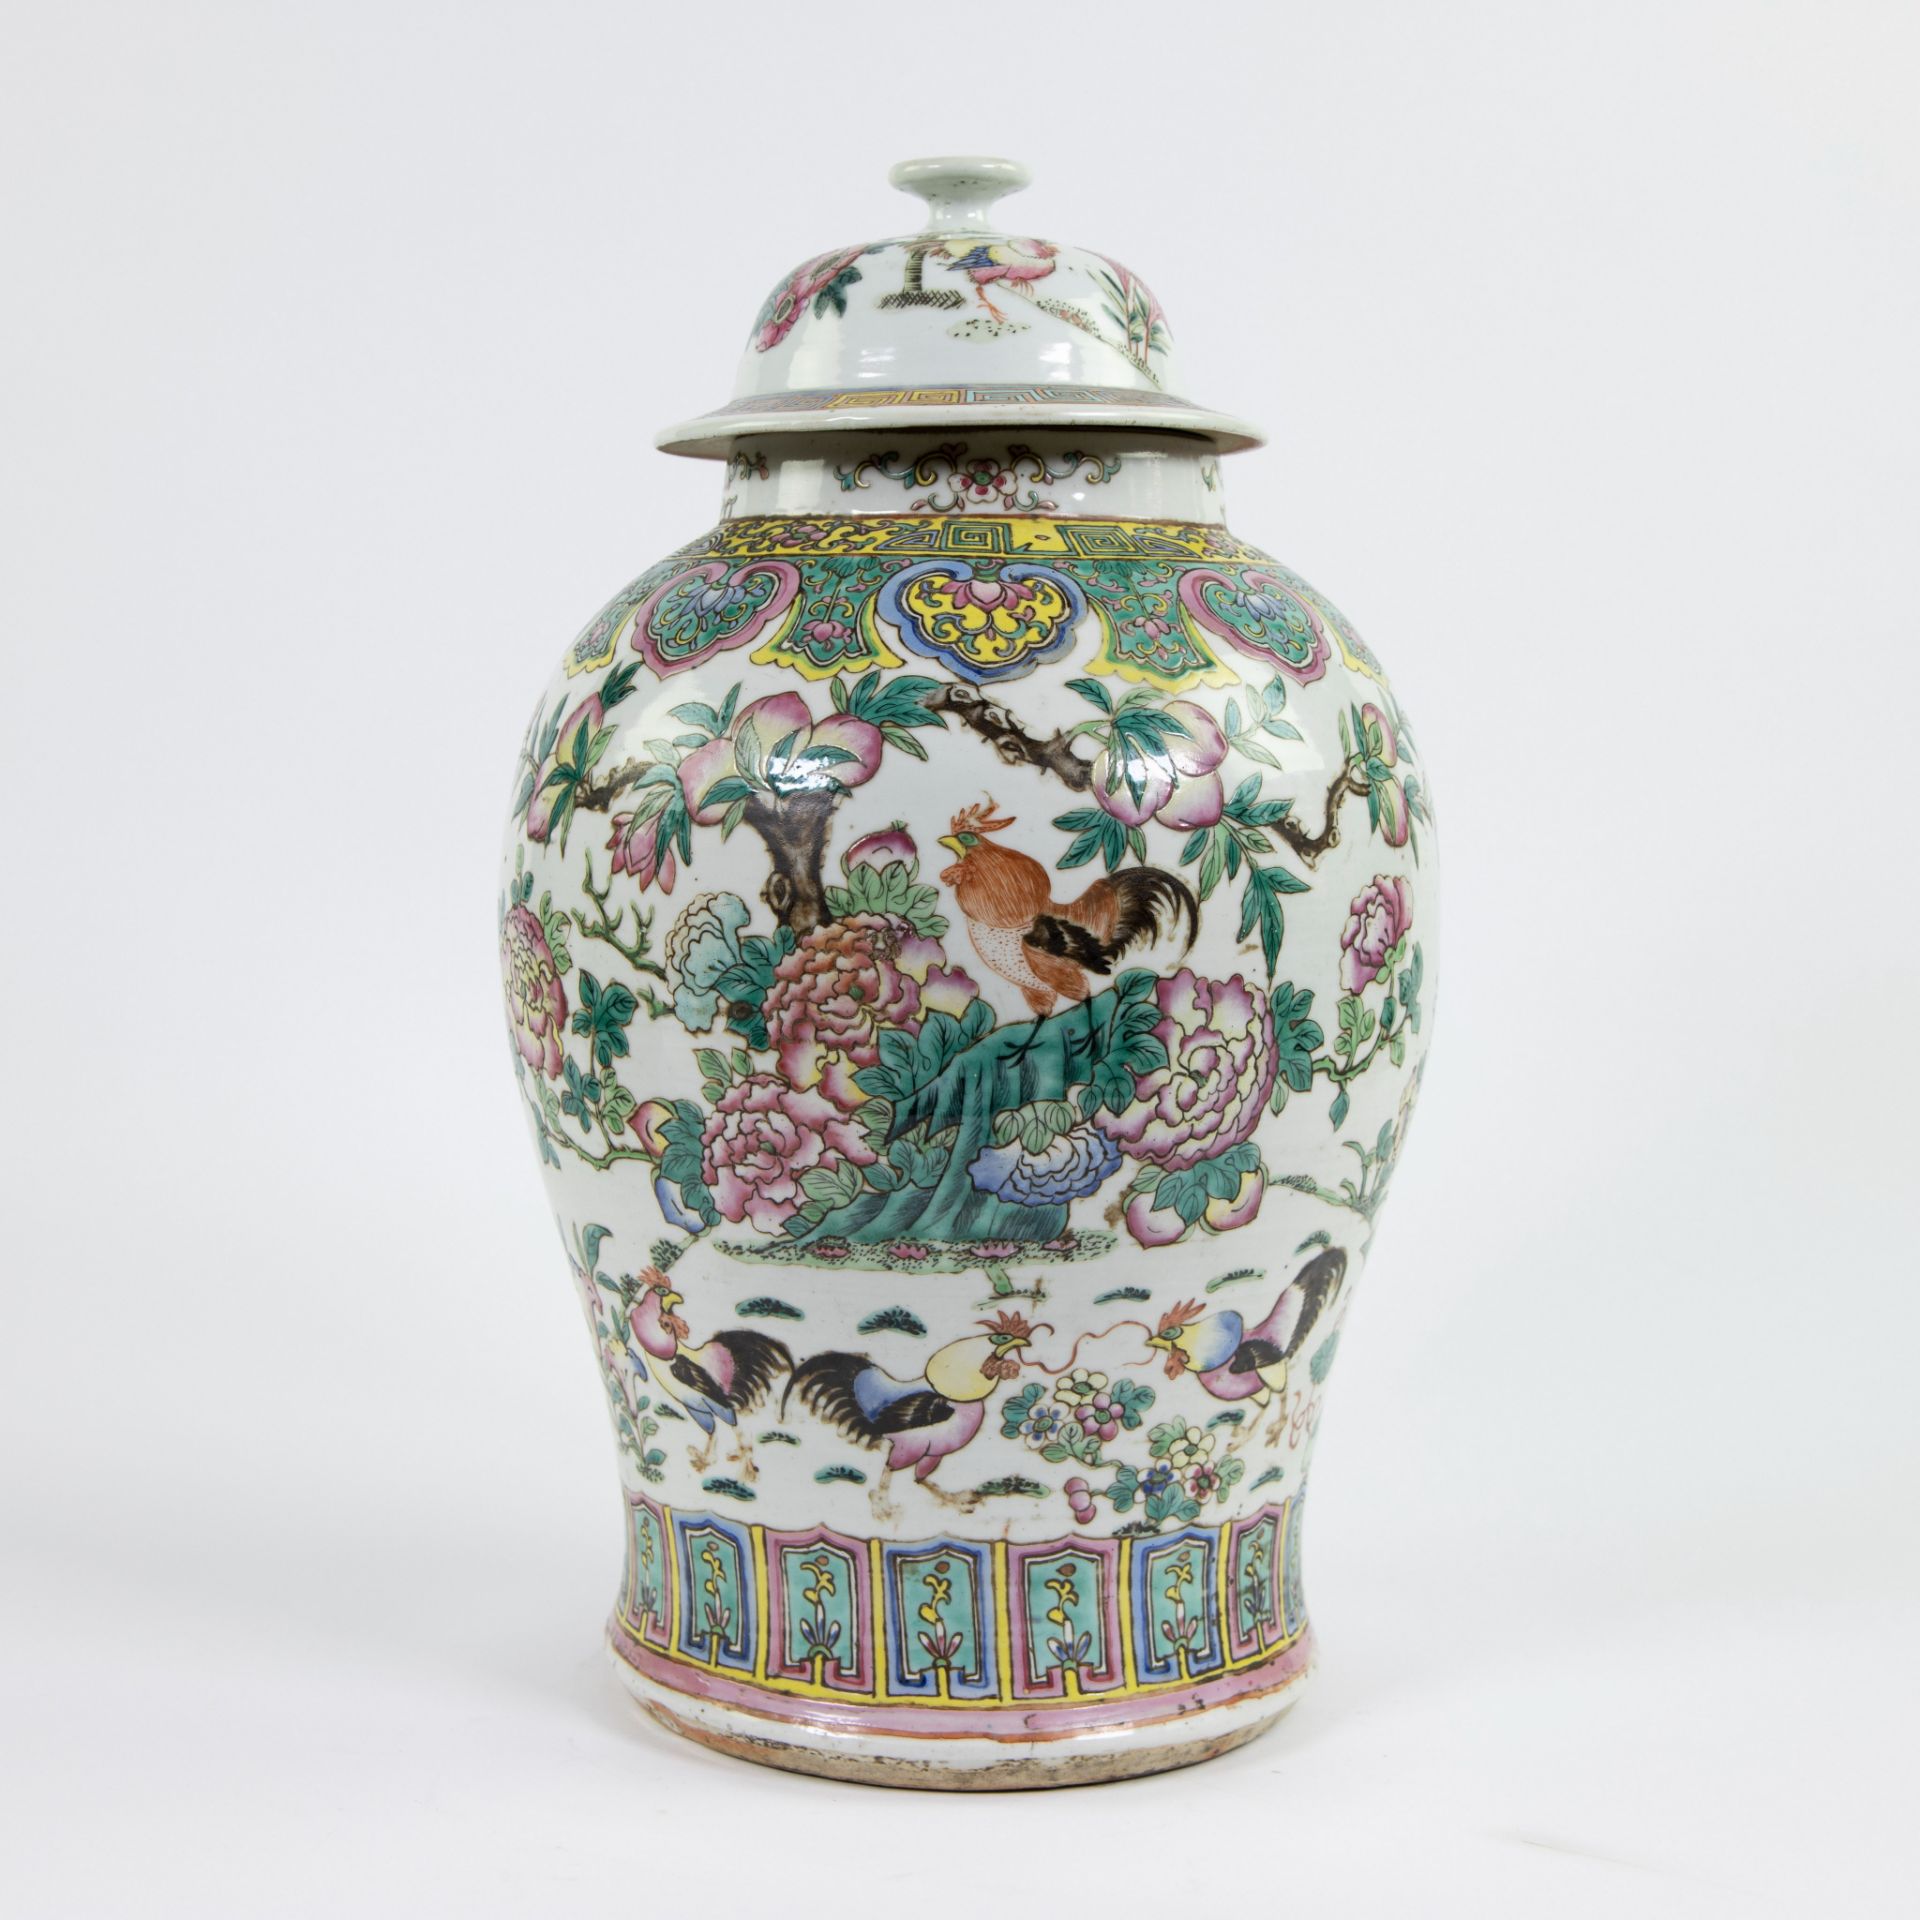 Chinese porcelain jar and its cover decorated in polychrome enamels with roosters and peonies. Late 